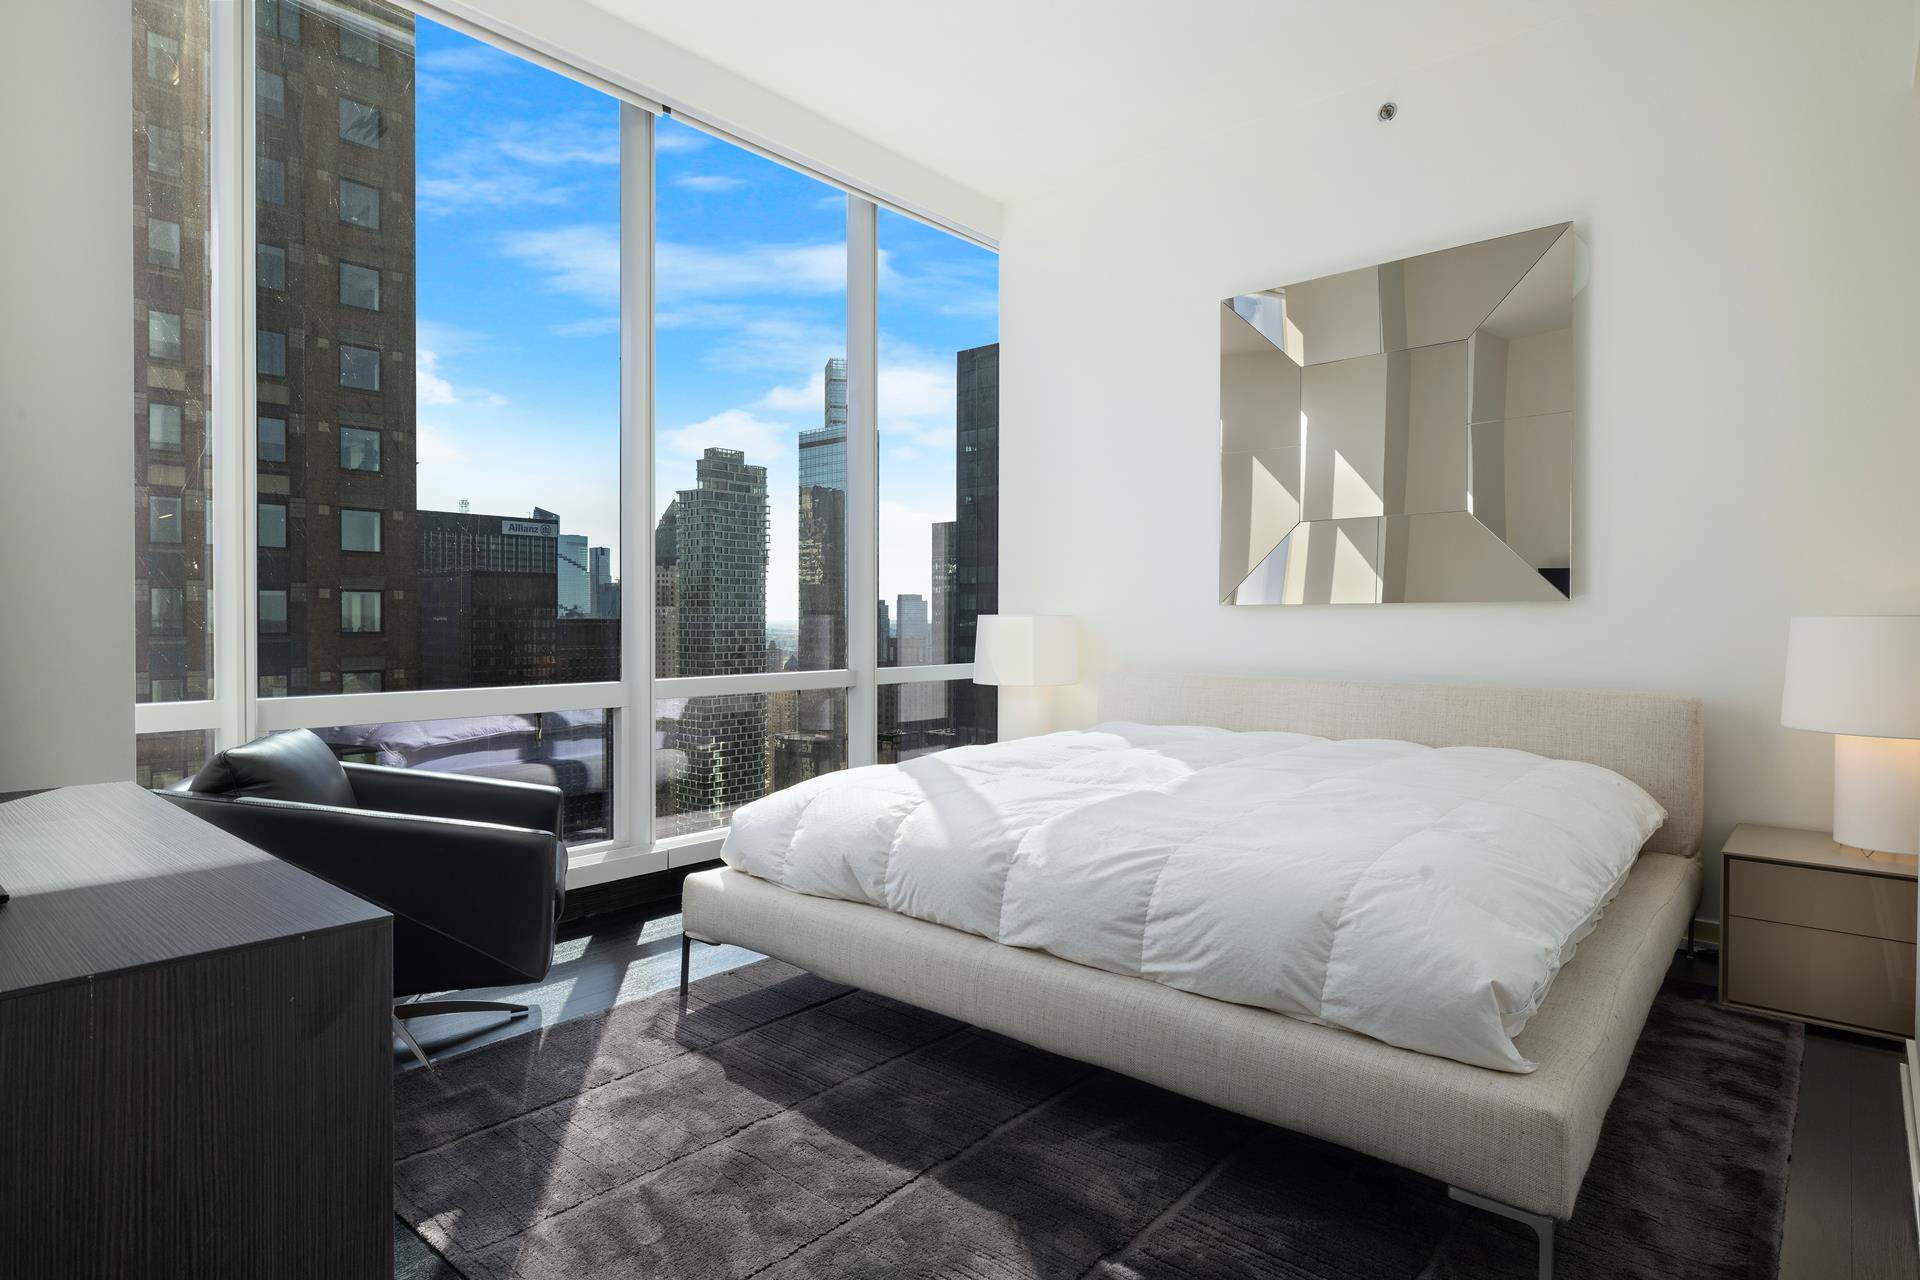 157 West 57th Street 49C, Central Park South, Midtown West, NYC - 4 Bedrooms  
4.5 Bathrooms  
7 Rooms - 